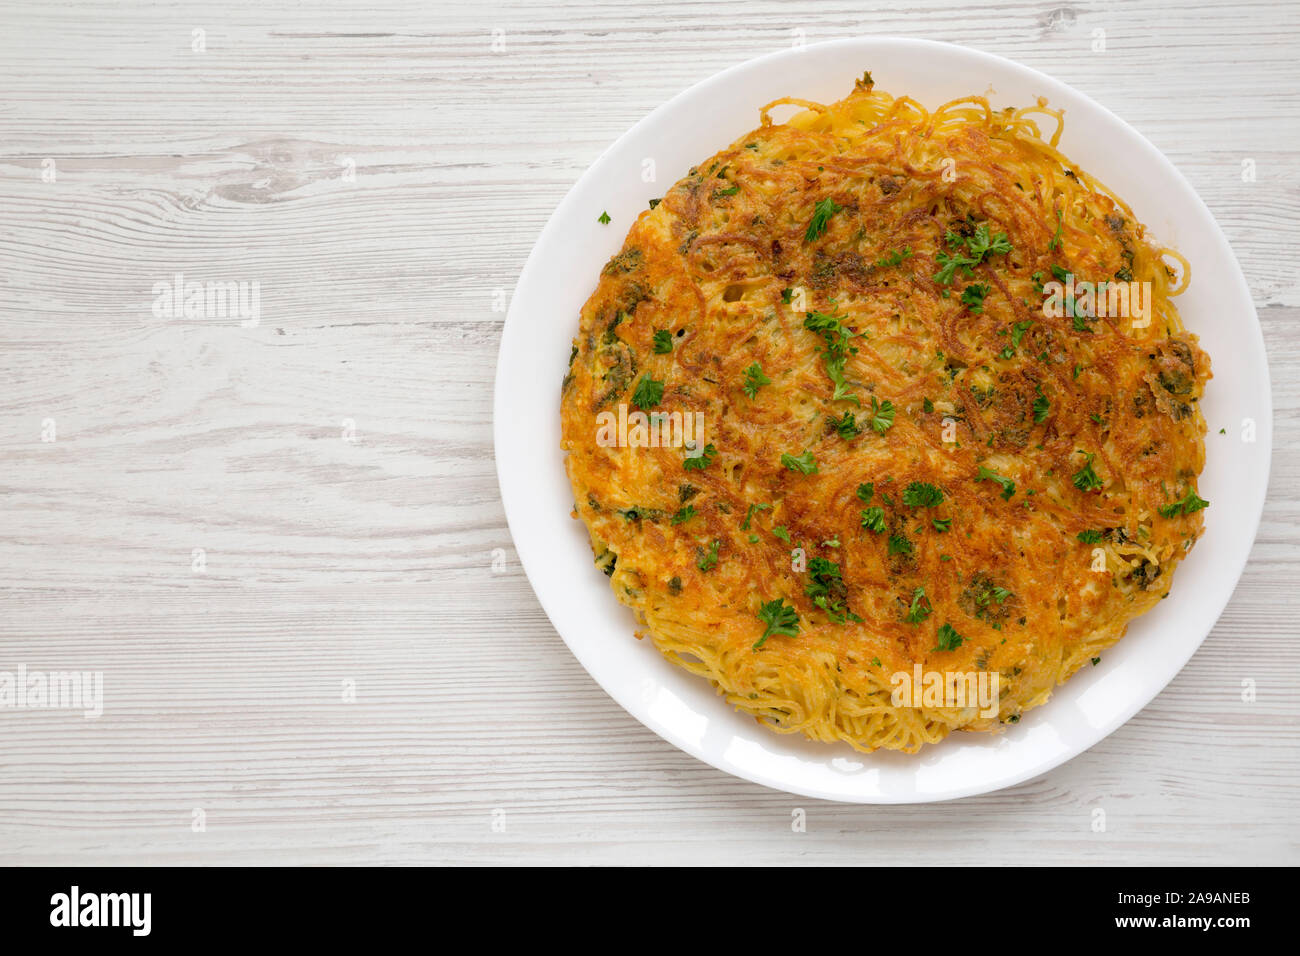 Homemade spaghetti omelette on a white plate over white wooden background, top view. Copy space. Stock Photo